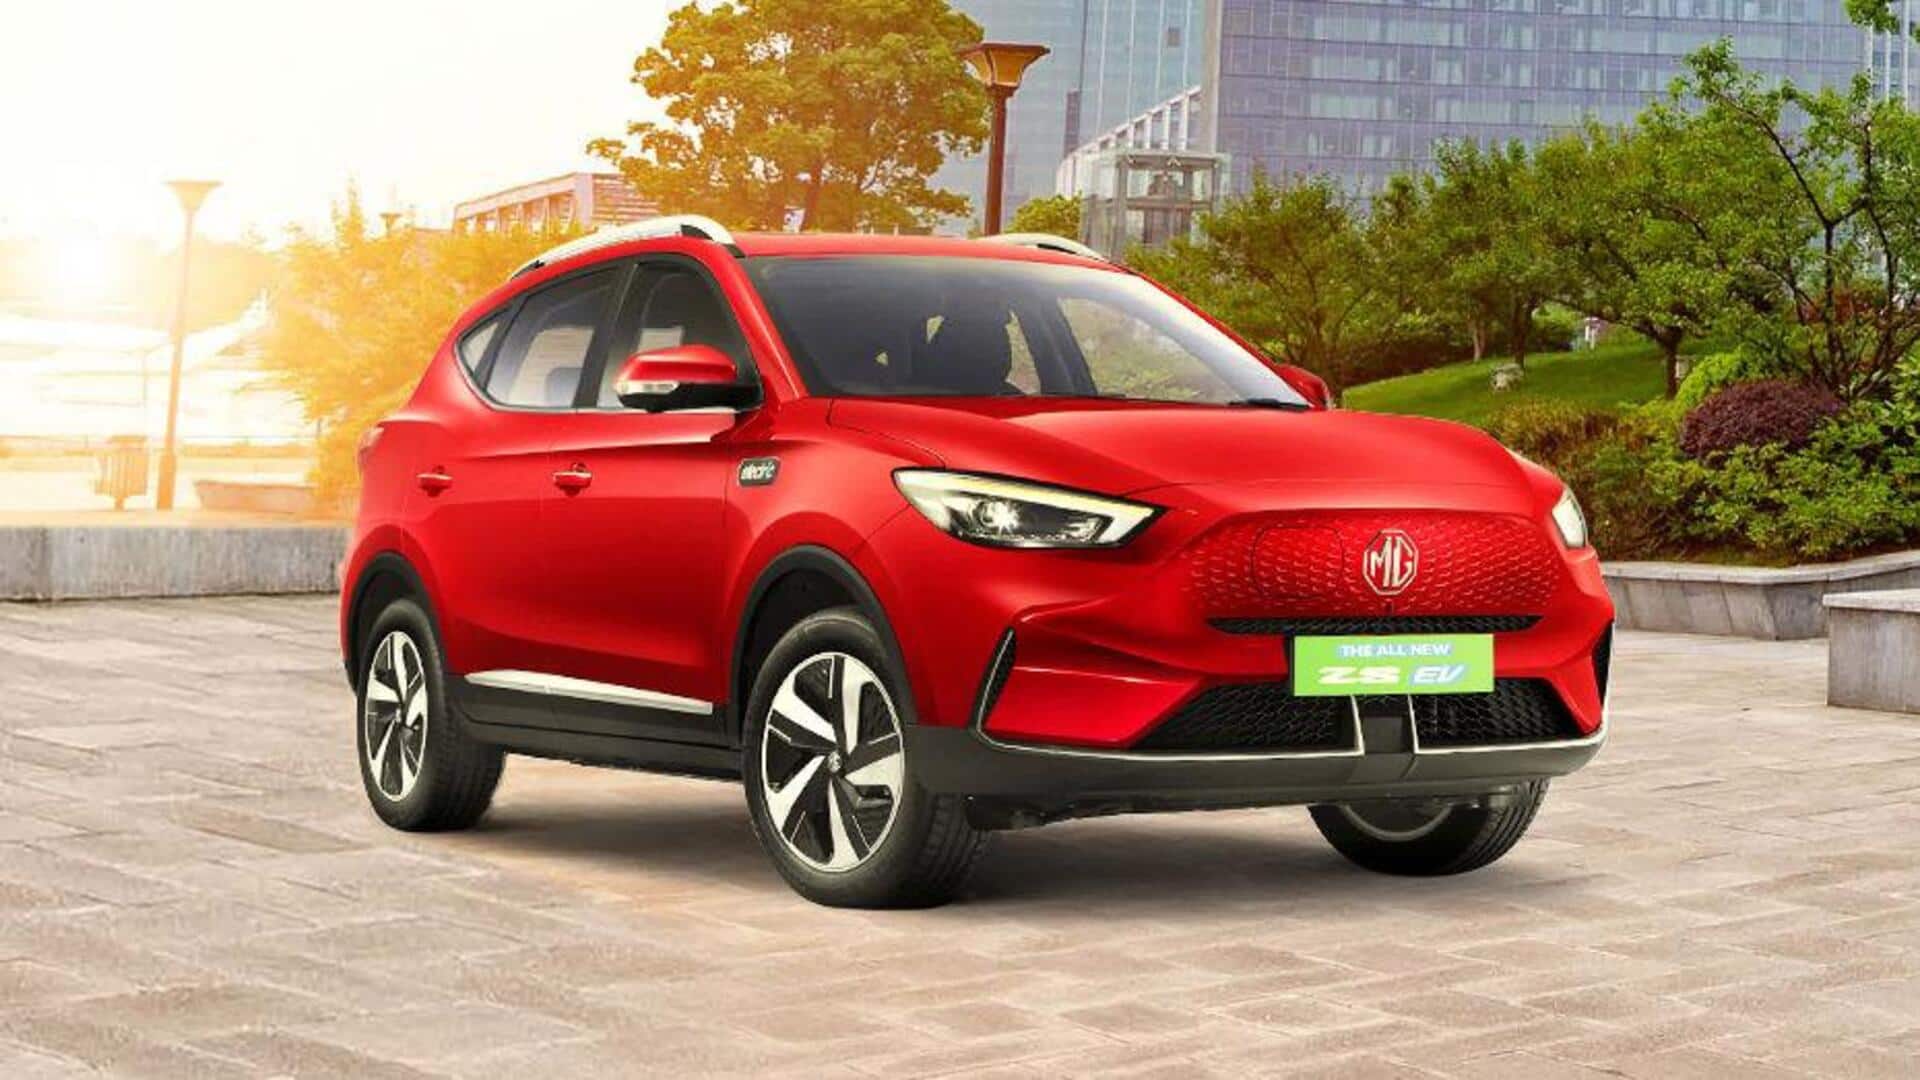 MG ZS EV Excite Pro debuts at Rs. 20 lakh